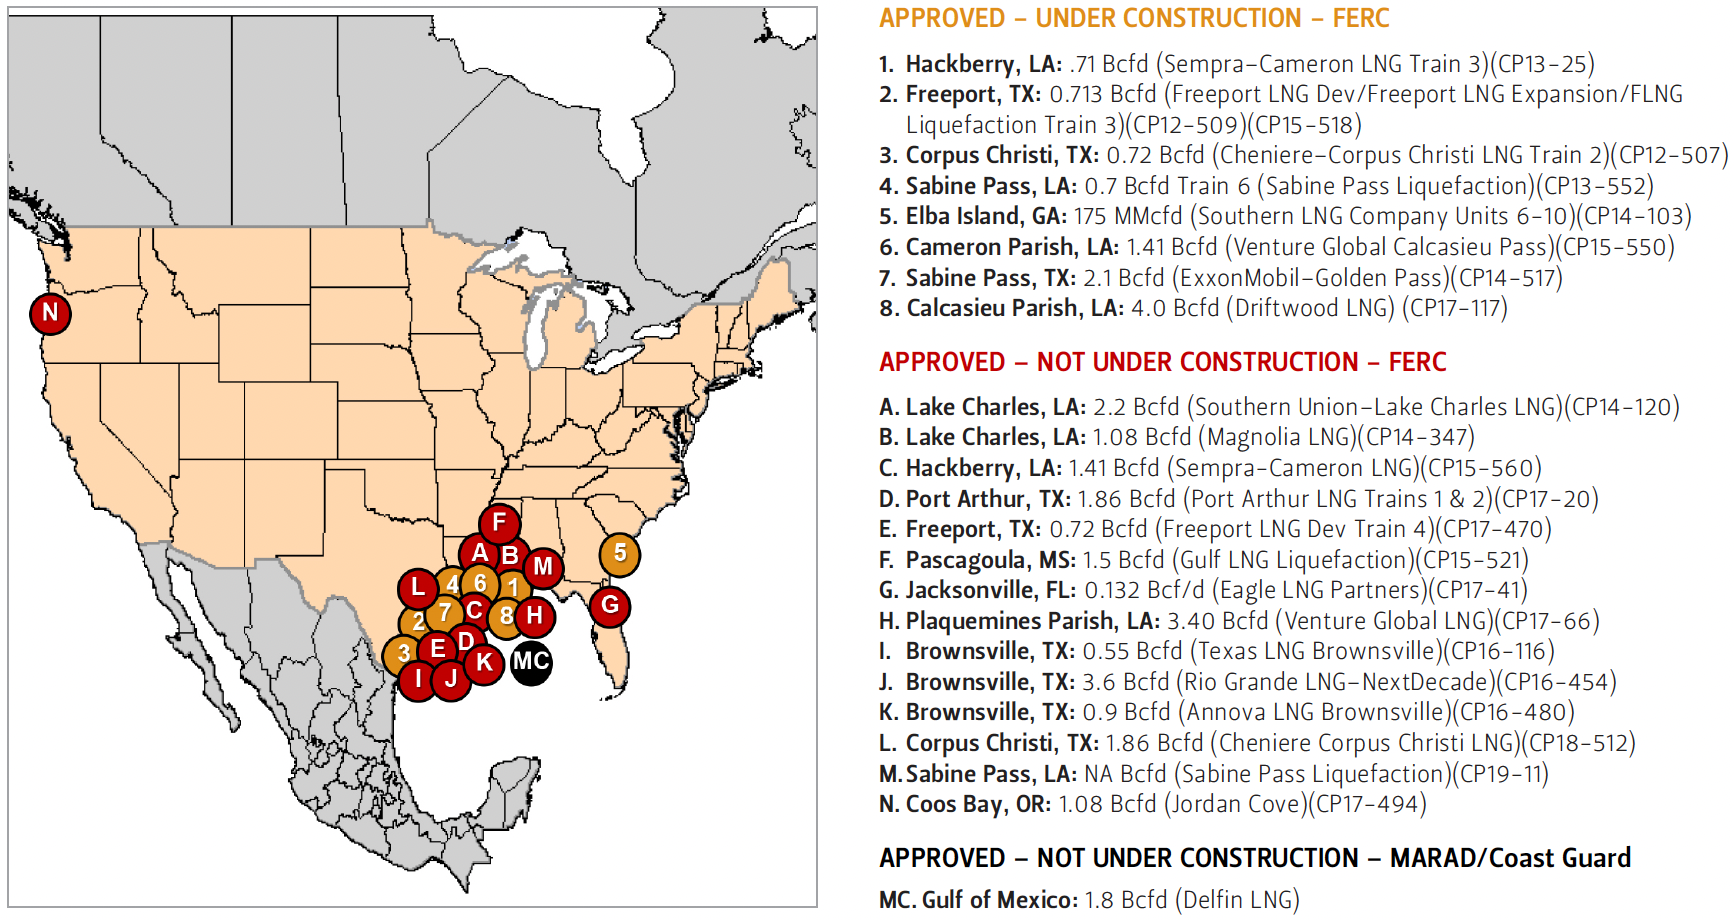 This map shows the locations of approved but incomplete LNG export terminals in North America.